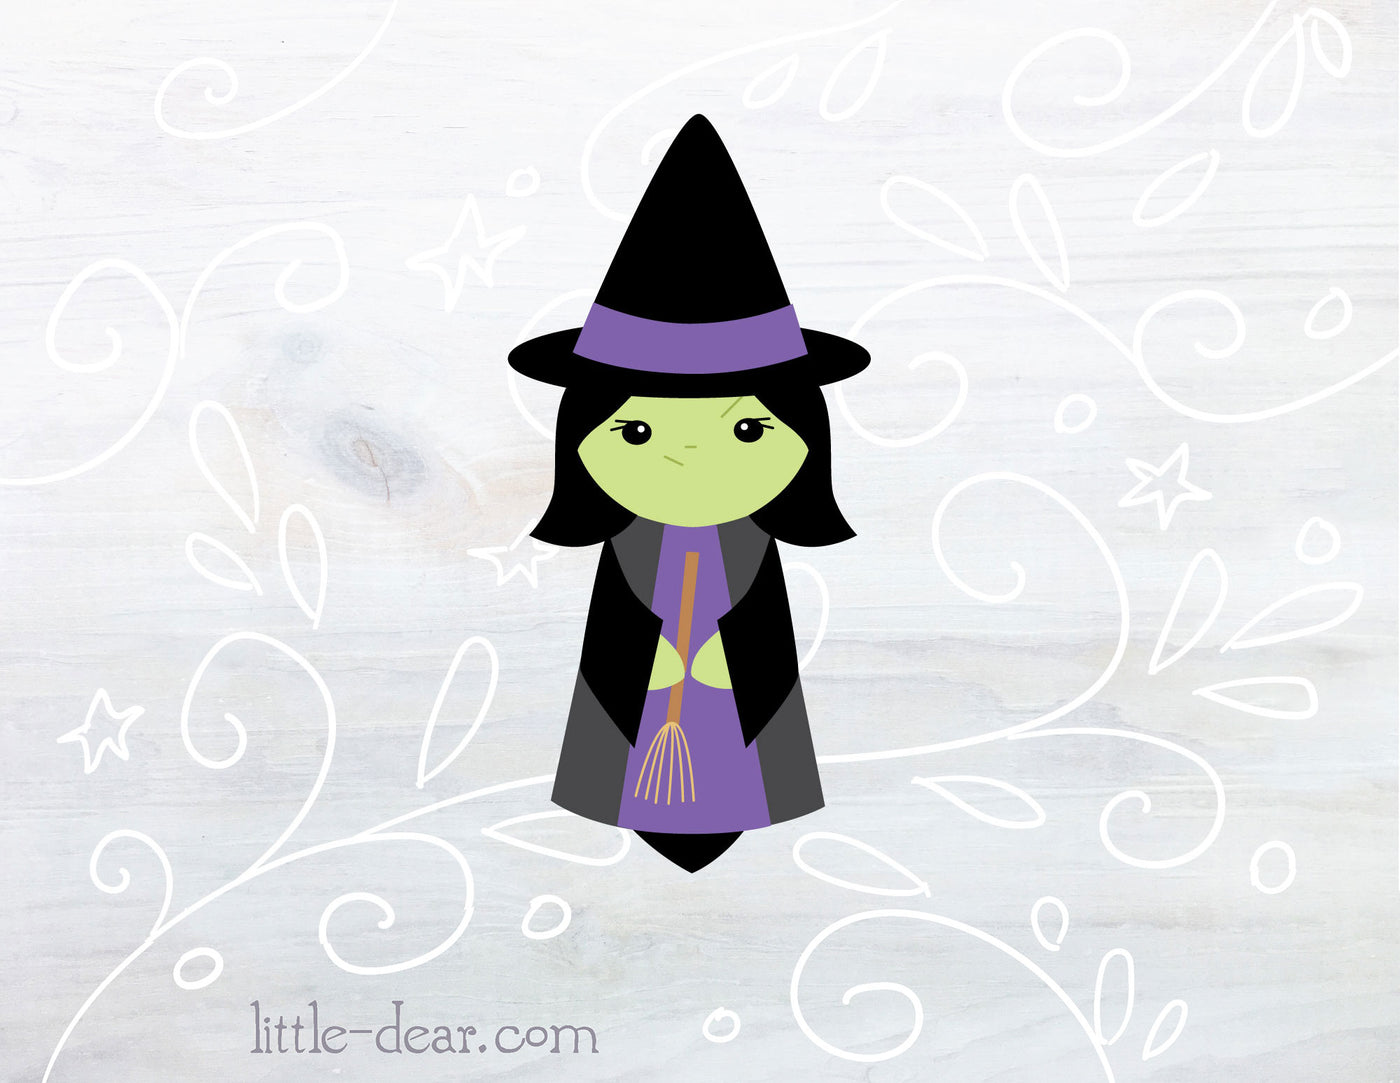 SVG Wicked Witch Halloween cut files for Cricut, Silhouette, PNG, JPG